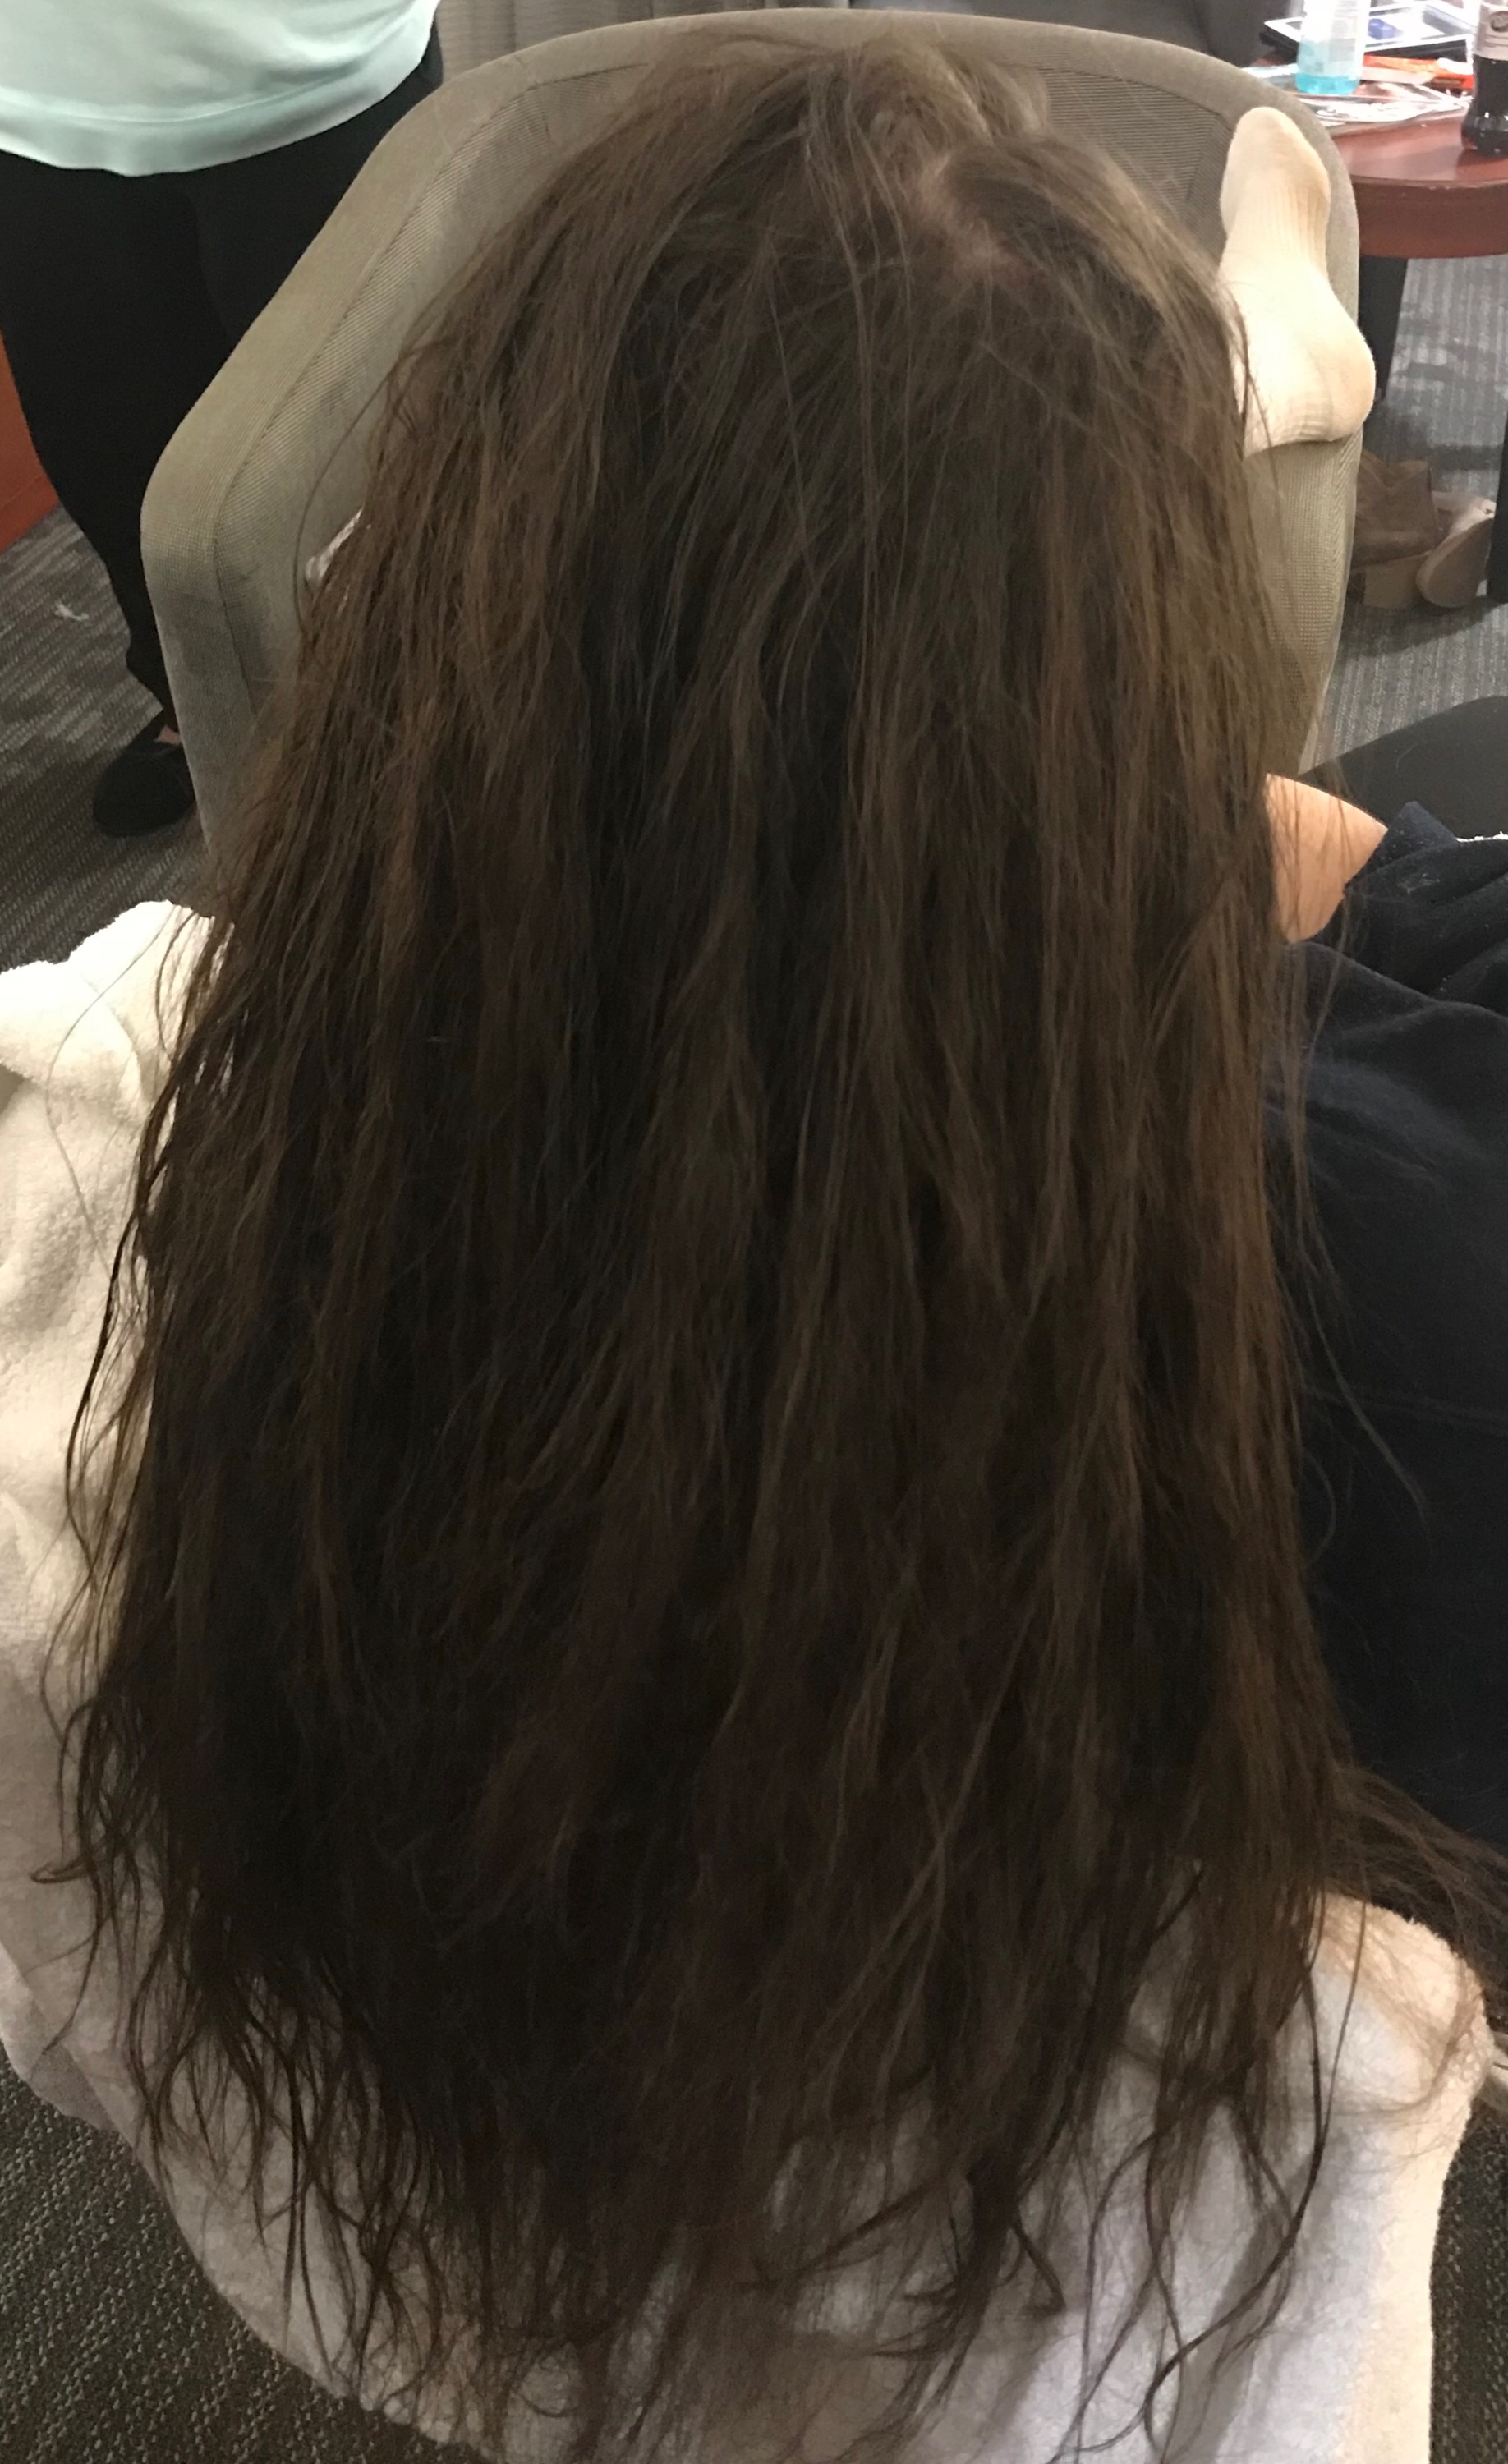 Over 9 months matted hair detangled after 2 days